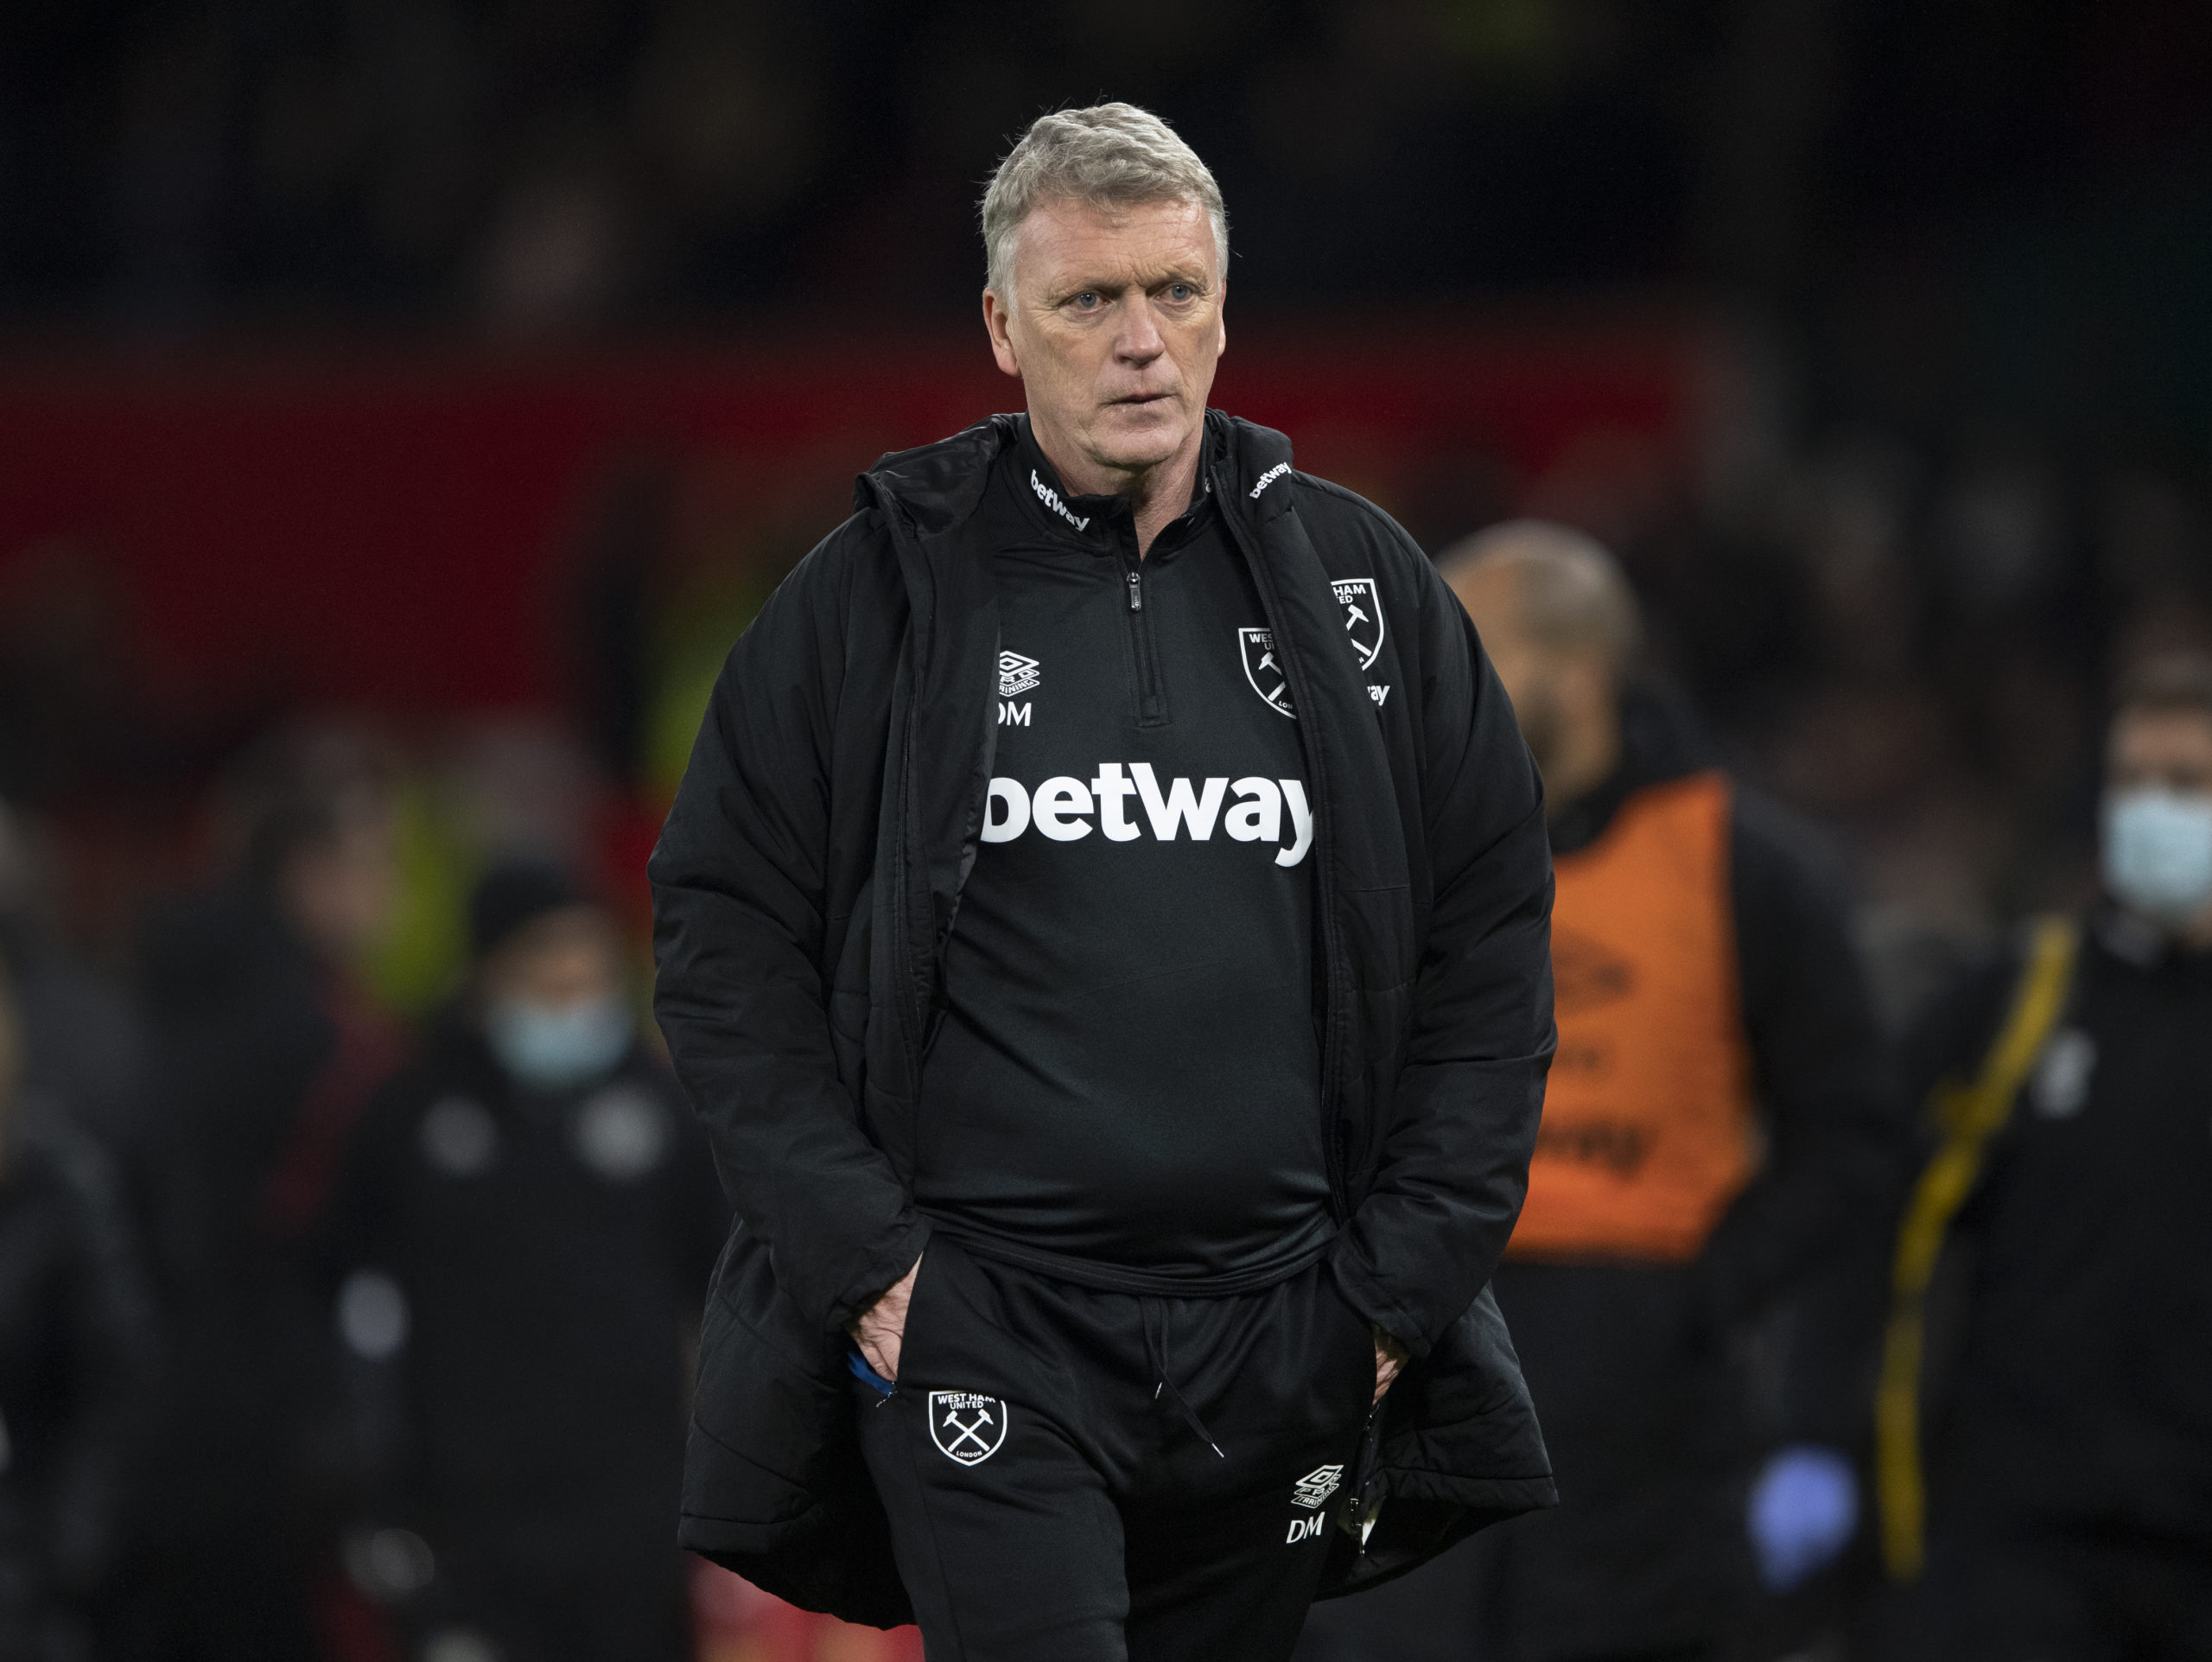 David Moyes has shared what he told the West Ham players at half-time vs Kidderminster